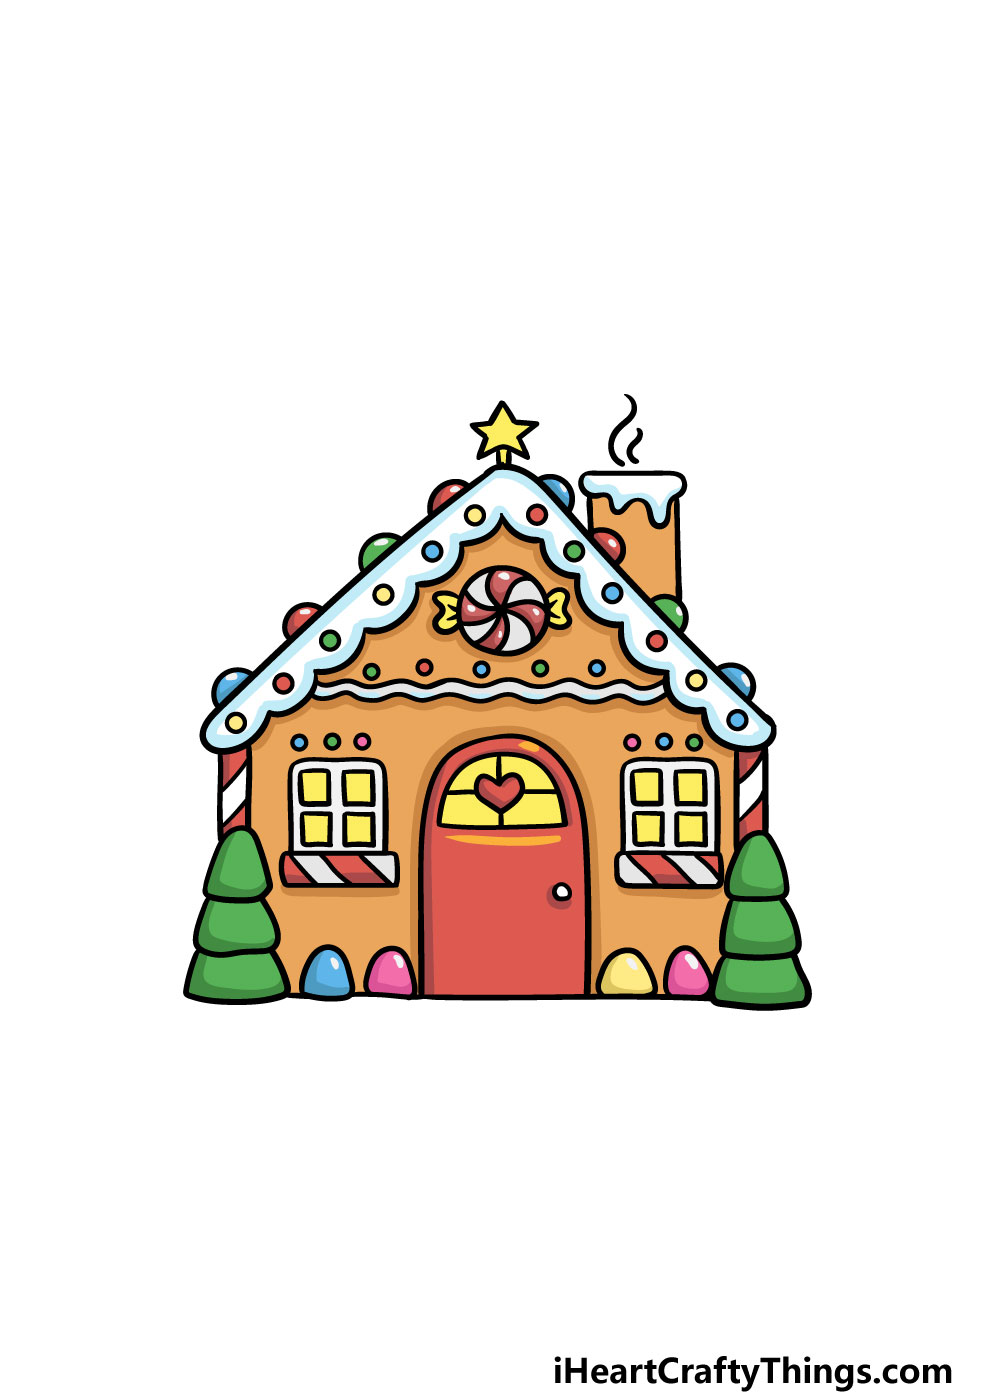 Gingerbread House Drawing - How To Draw A Gingerbread House ...